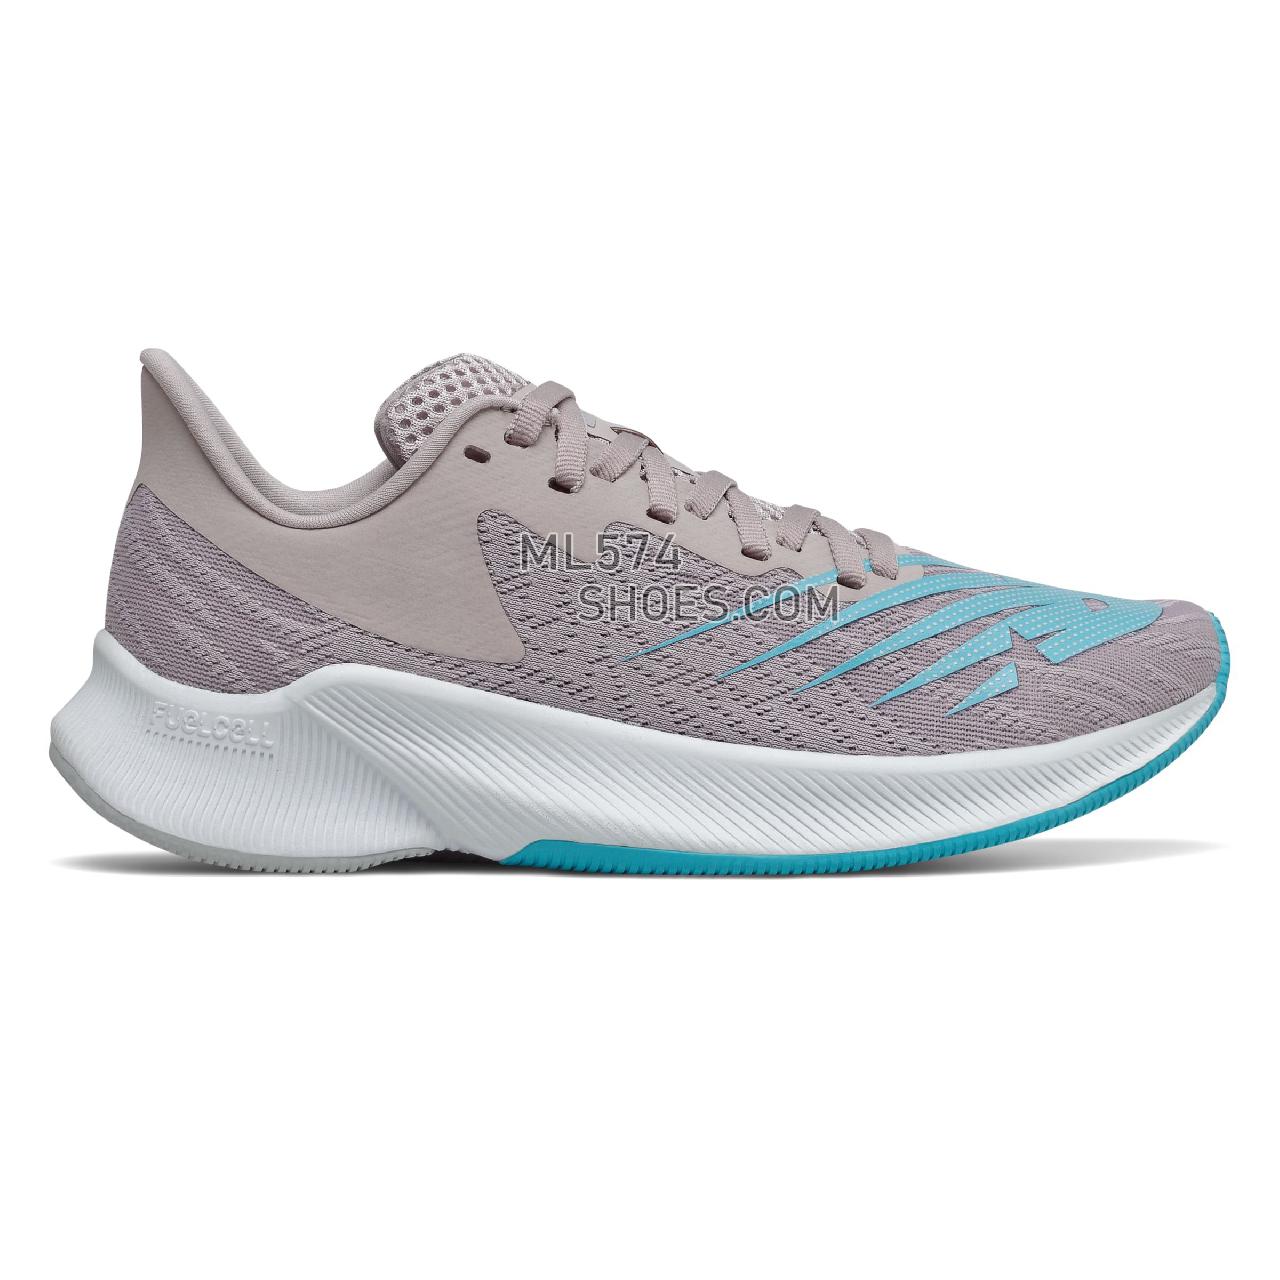 New Balance FuelCell Prism - Women's Stability Running - Logwood with Virtual Sky - WFCPZCR